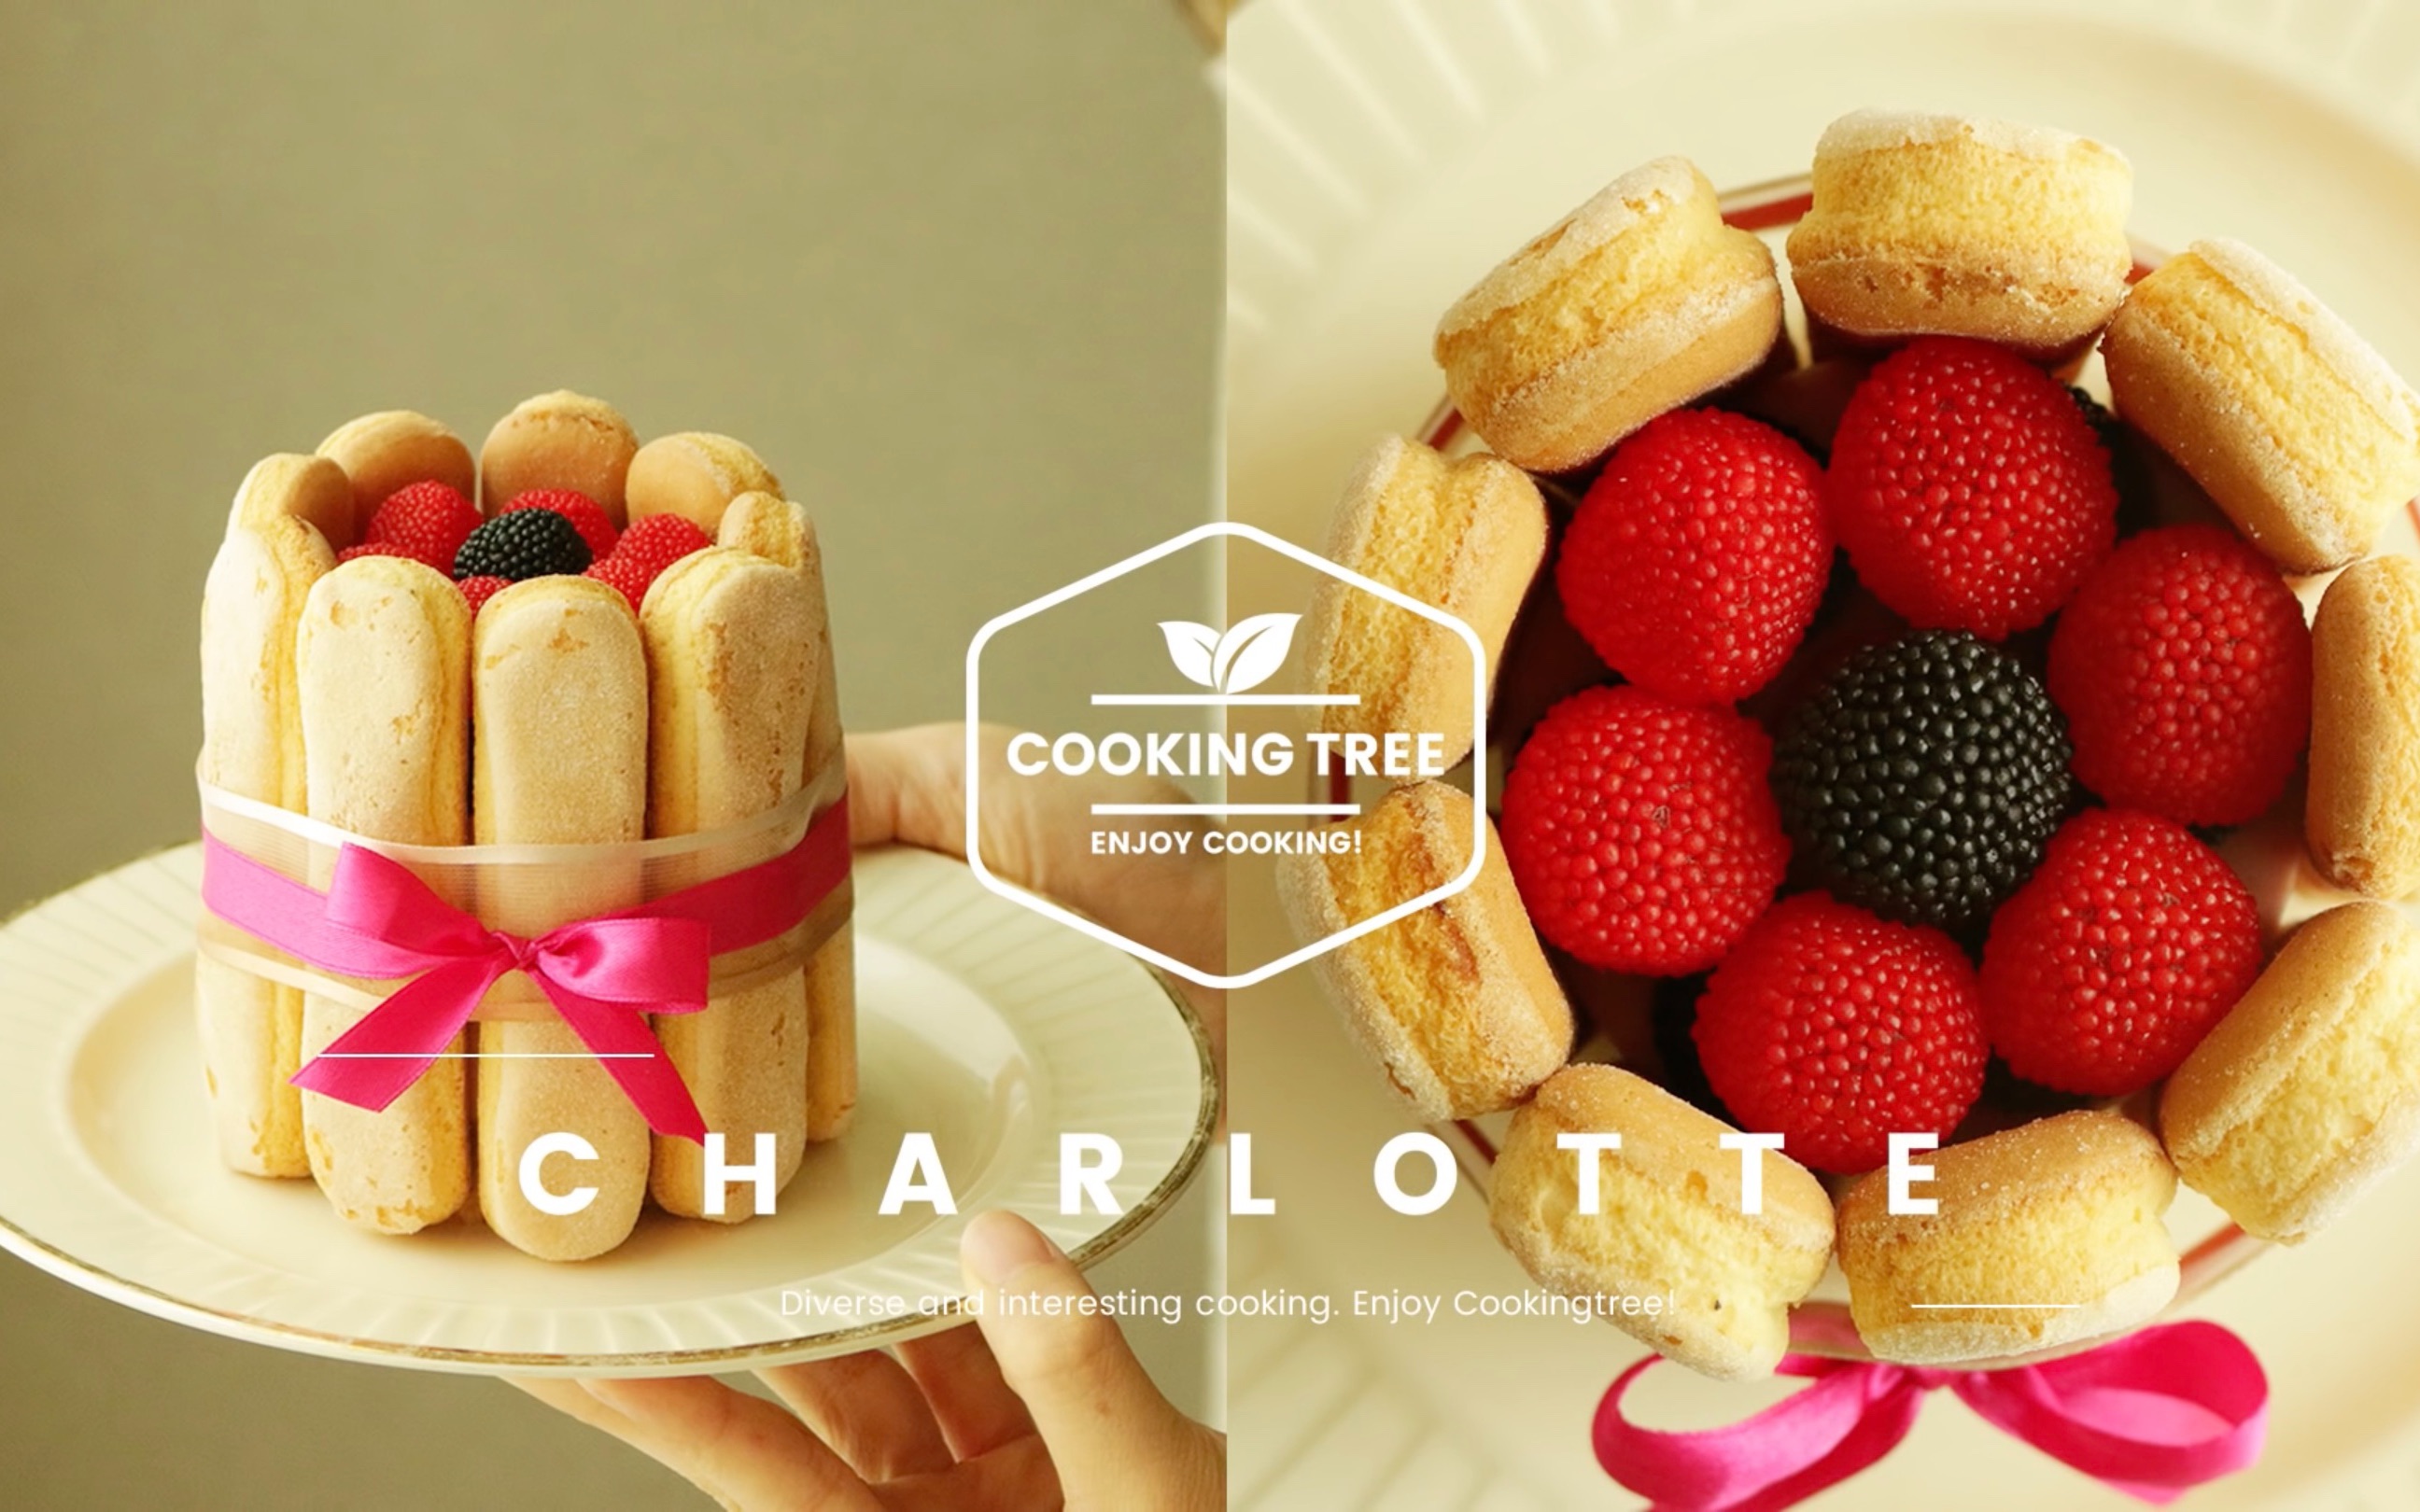 strawberry charlotte rcipe, mousse cake cooking tree